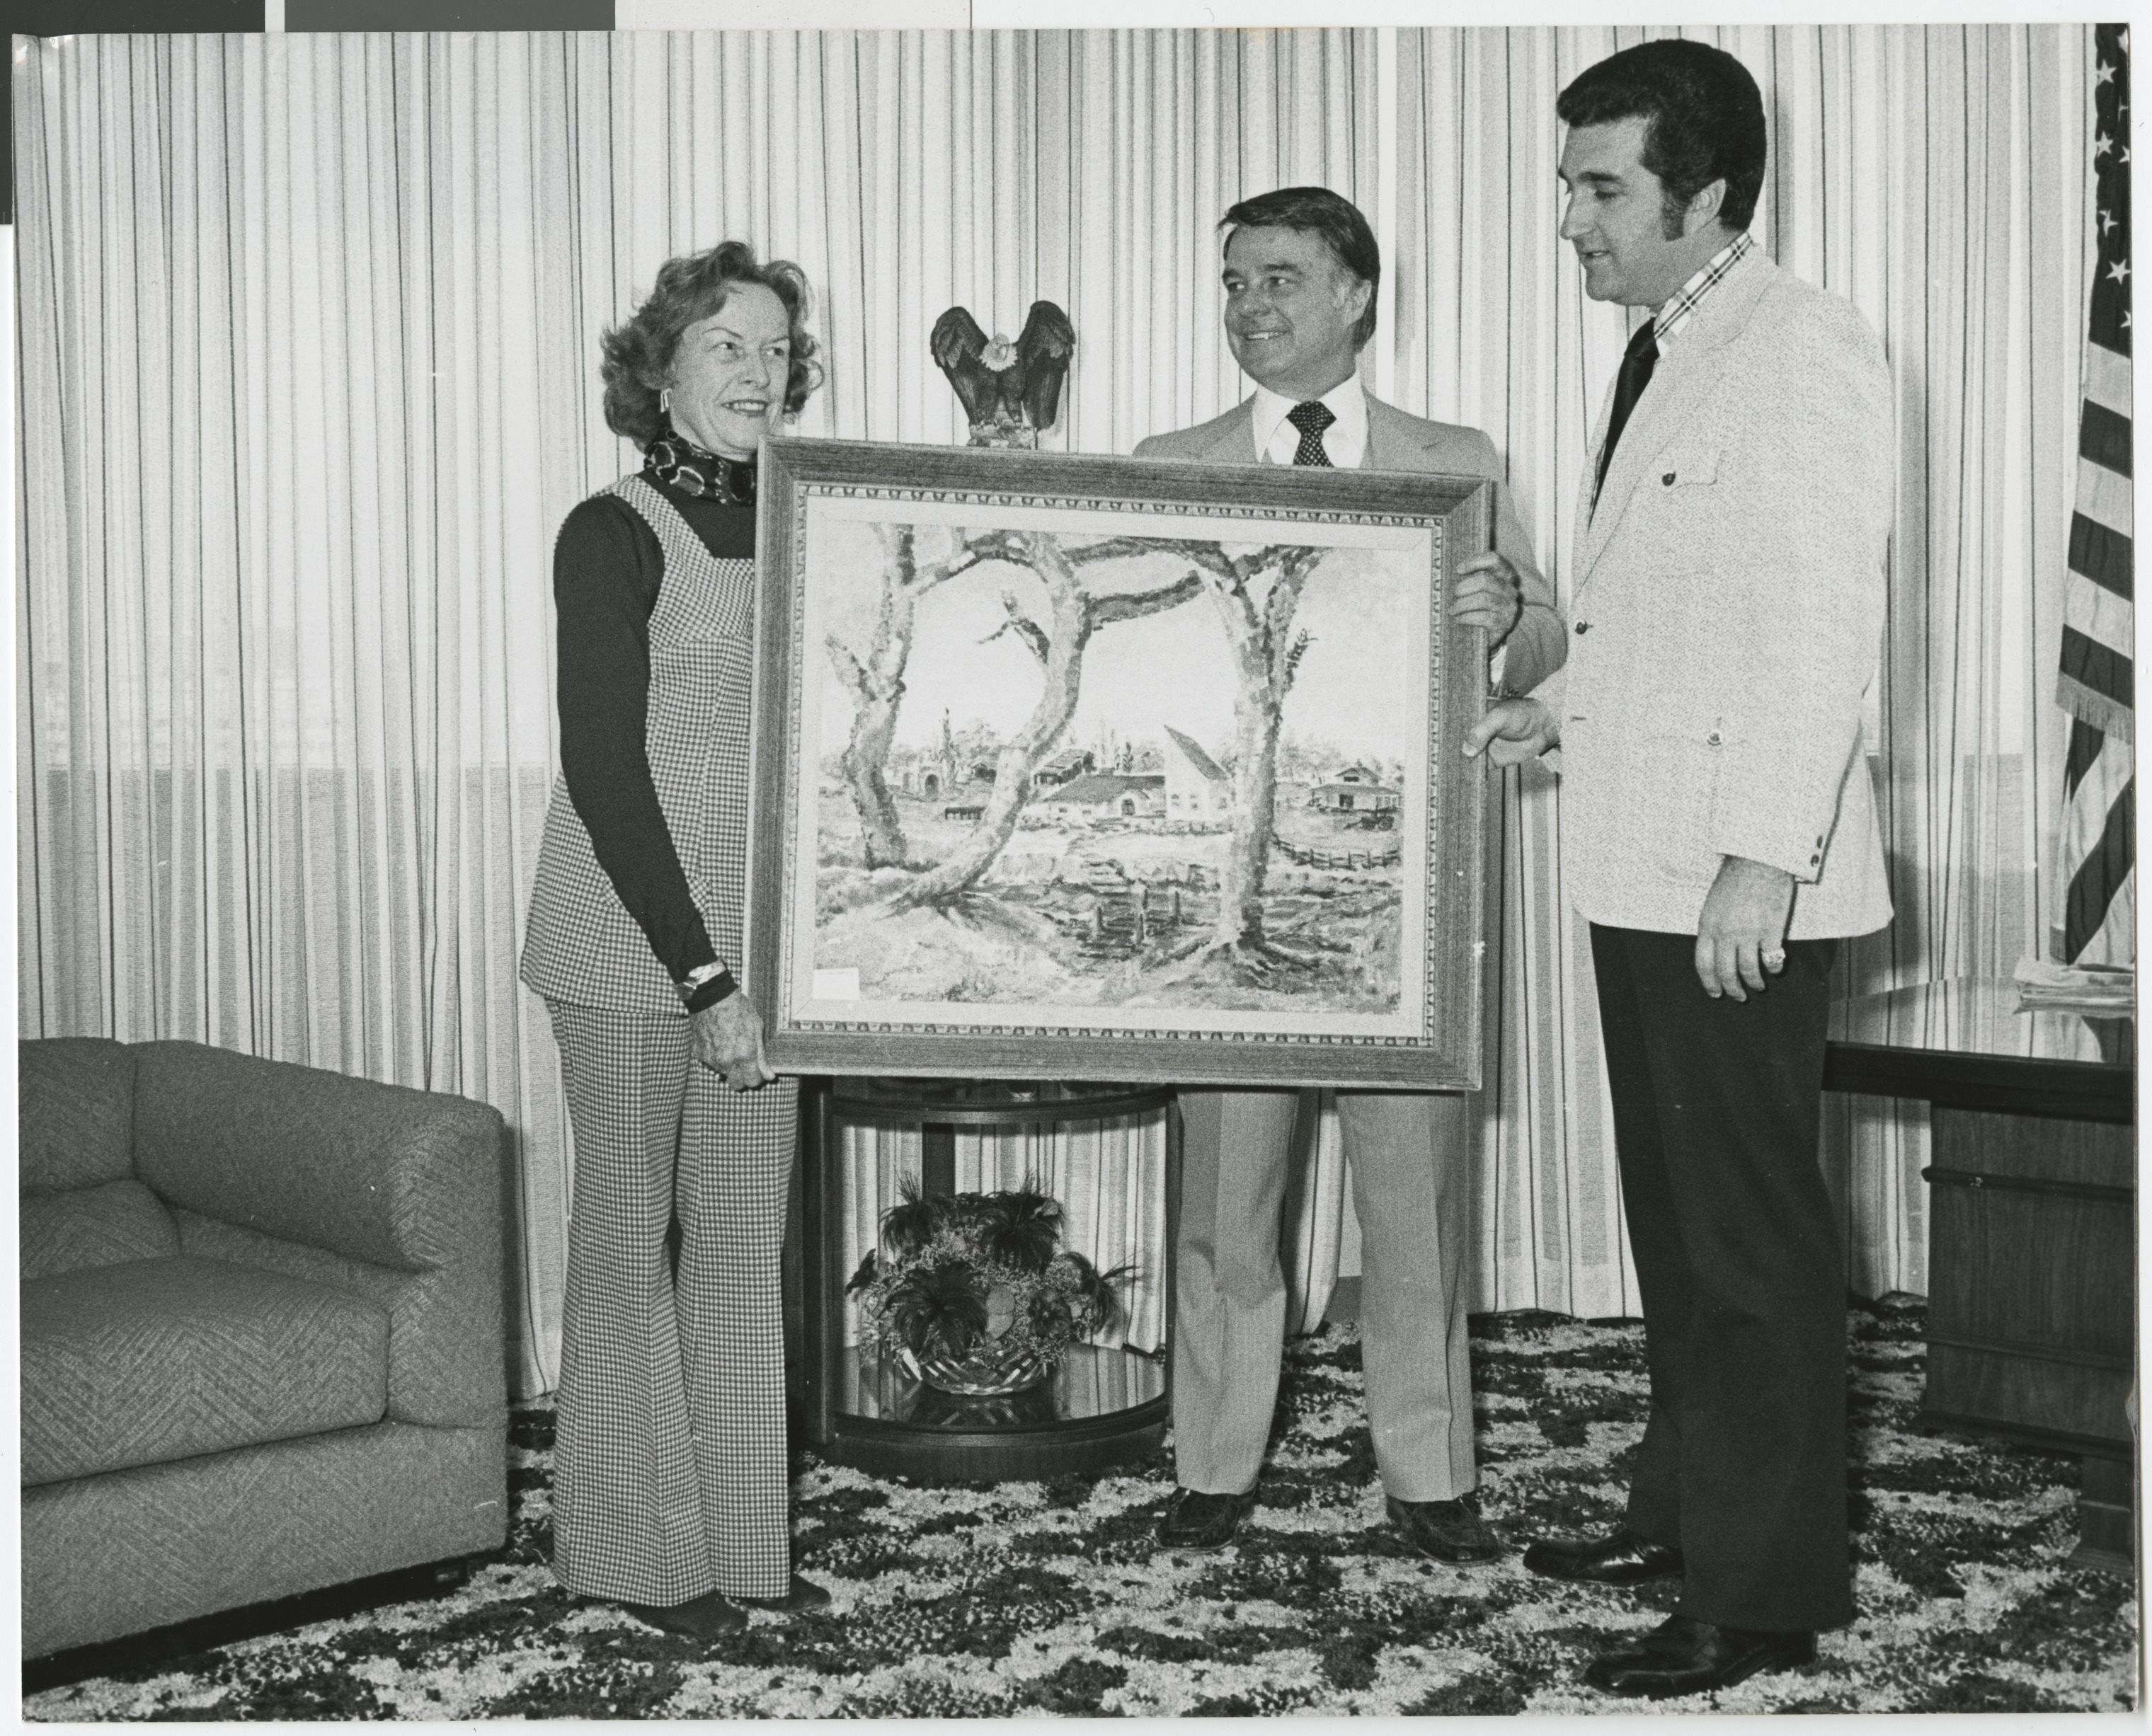 Photograph of Ron Lurie (right) with Bill Briare and Berta Ewing, April 4, 1977